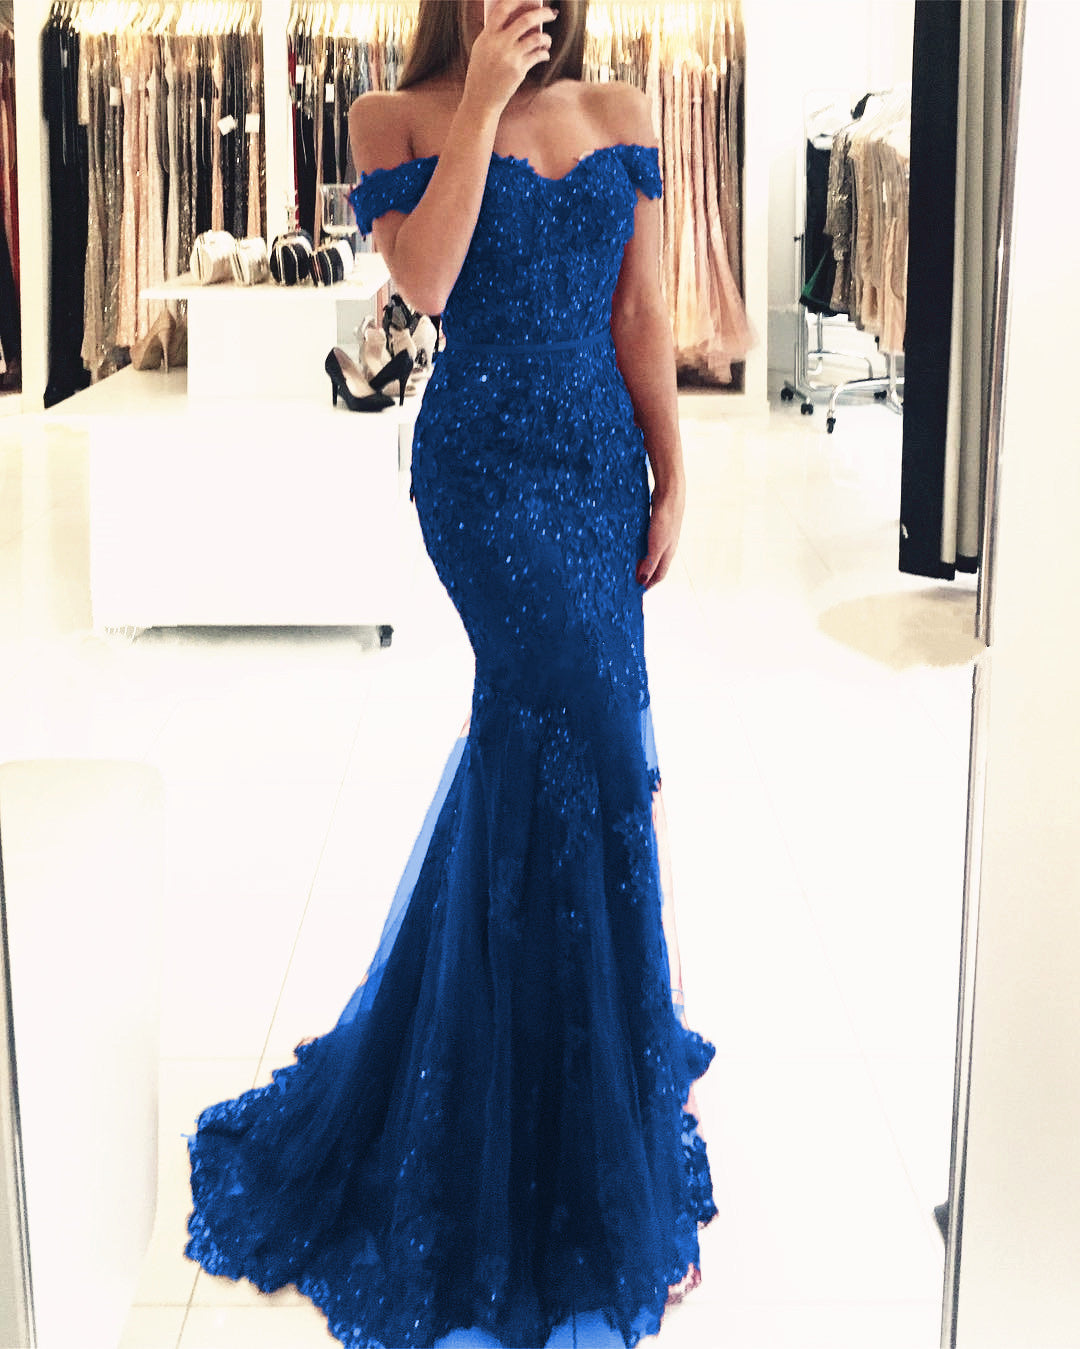 Off The Shoulder Lace Mermaid Prom Dresses 2019 Elegant Evening Gowns